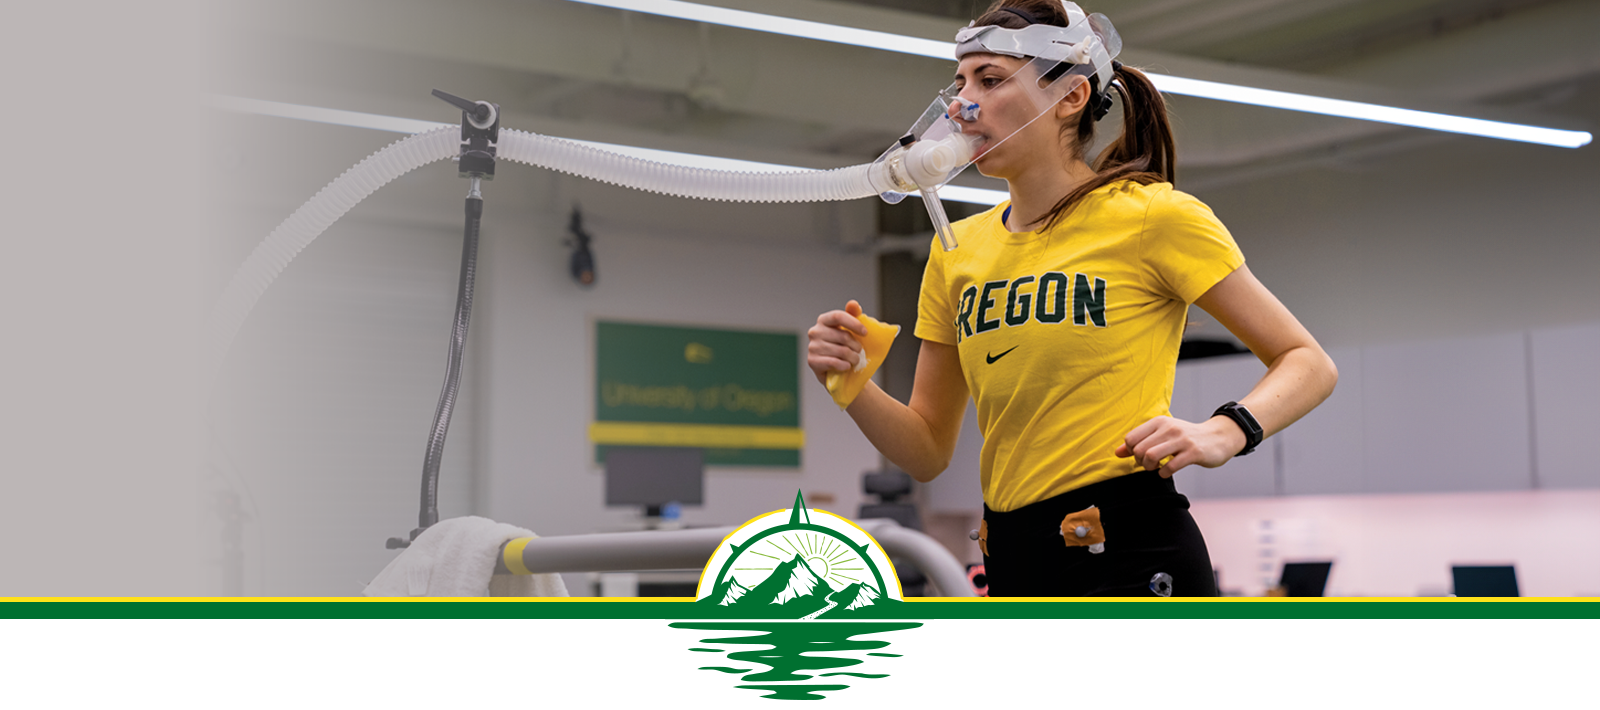 Woman wearing a yellow Oregon T-shirt running on a treadmill with devices attached to her face and body for research.